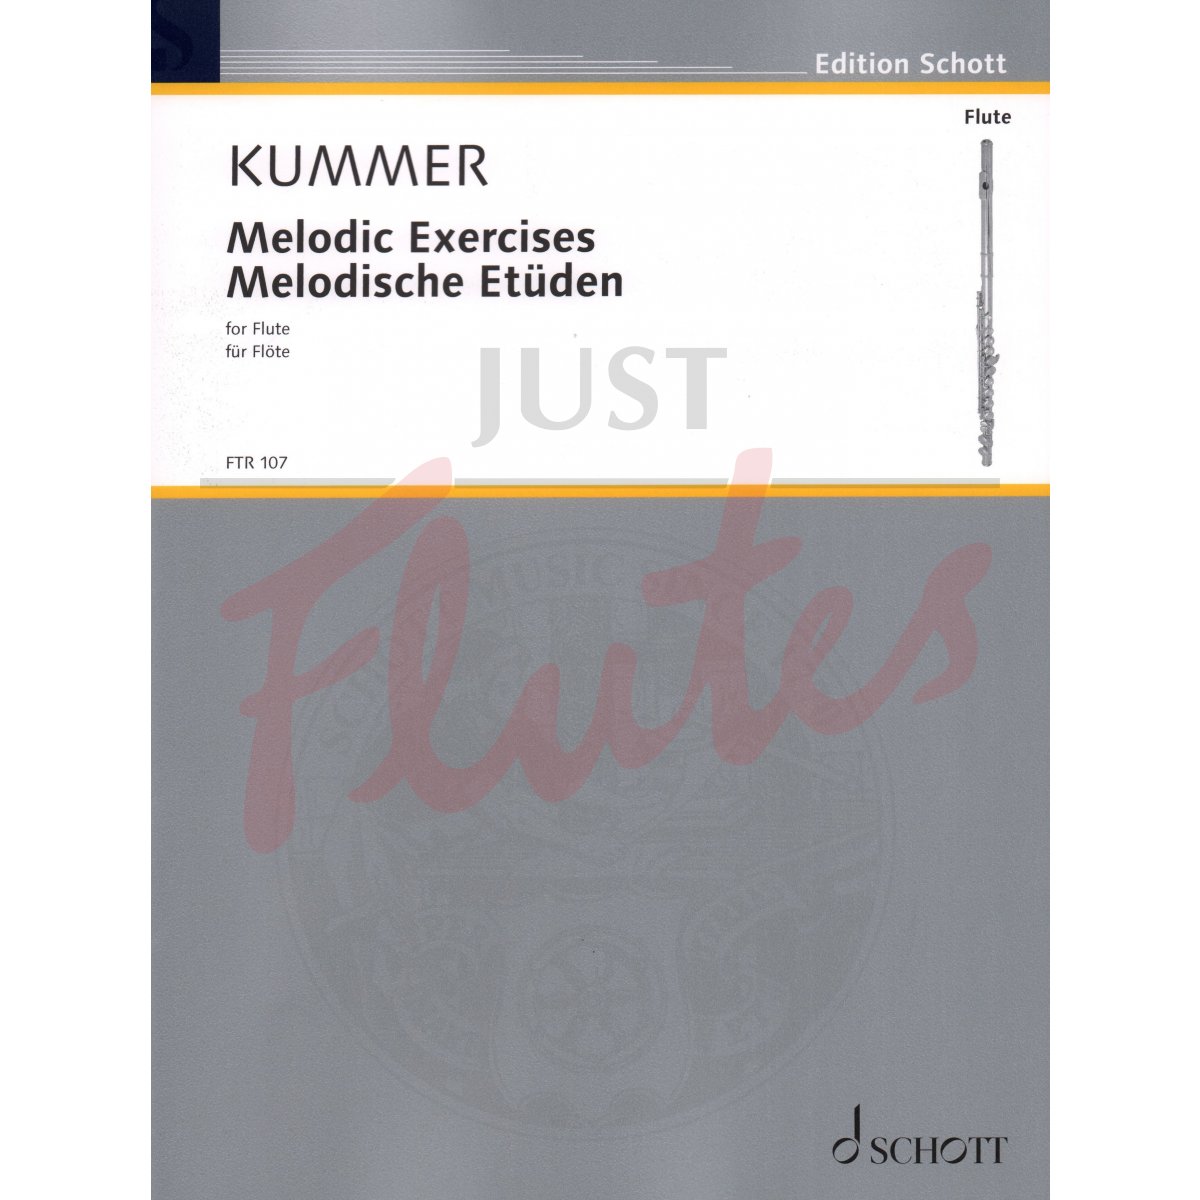 Melodic Exercises for Flute